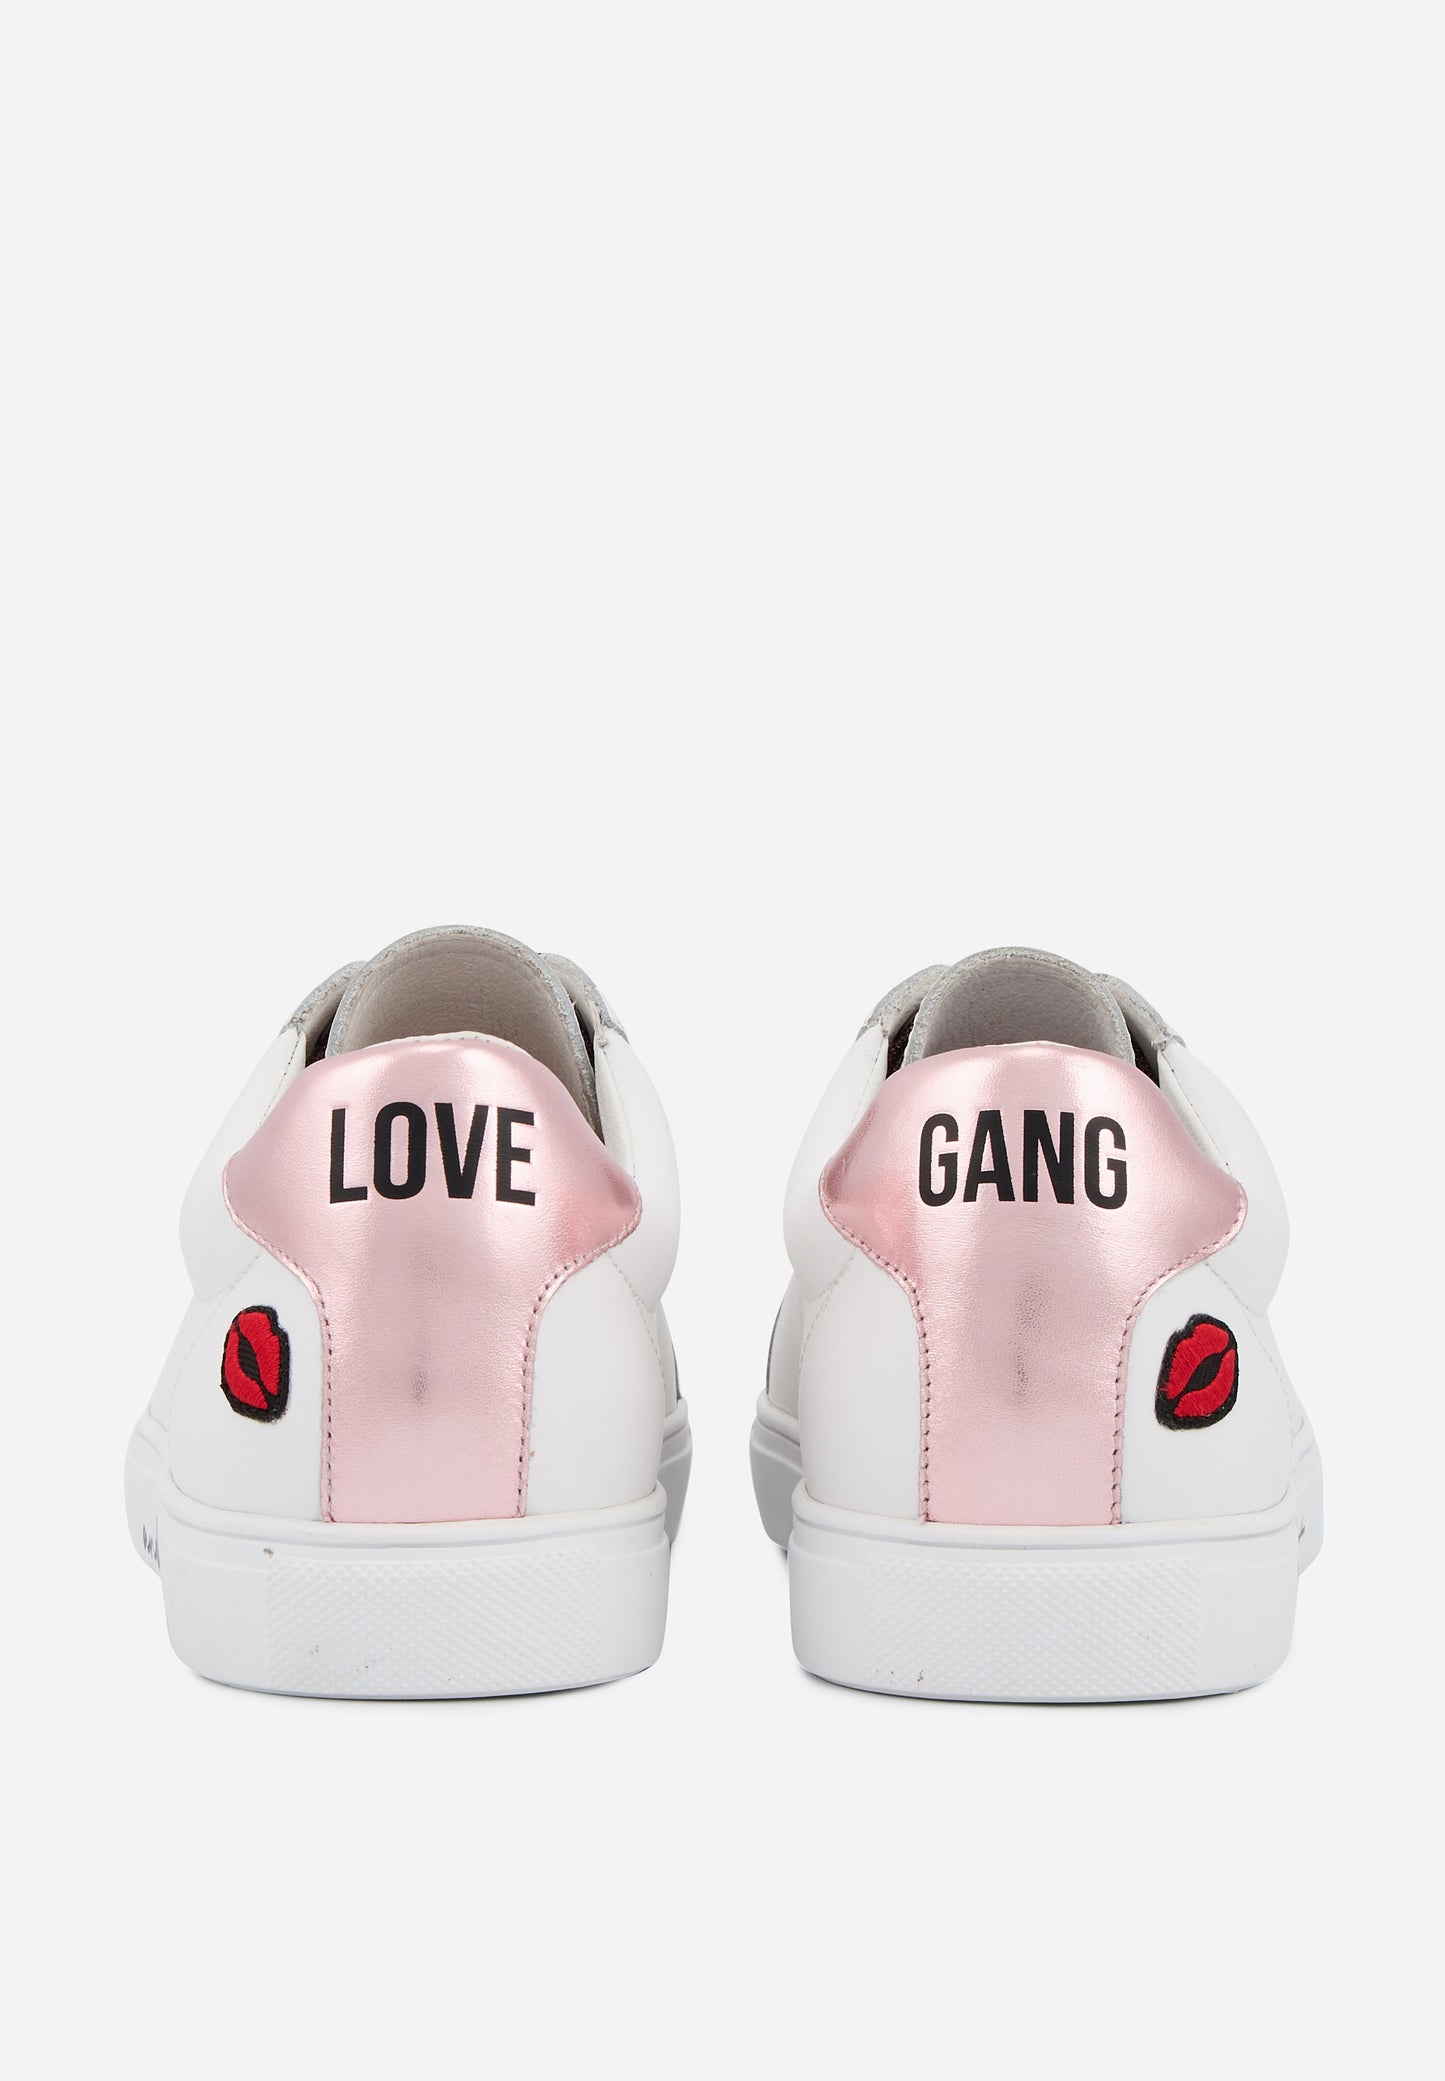 Simone Love Gang-Not perfect Rose Gold